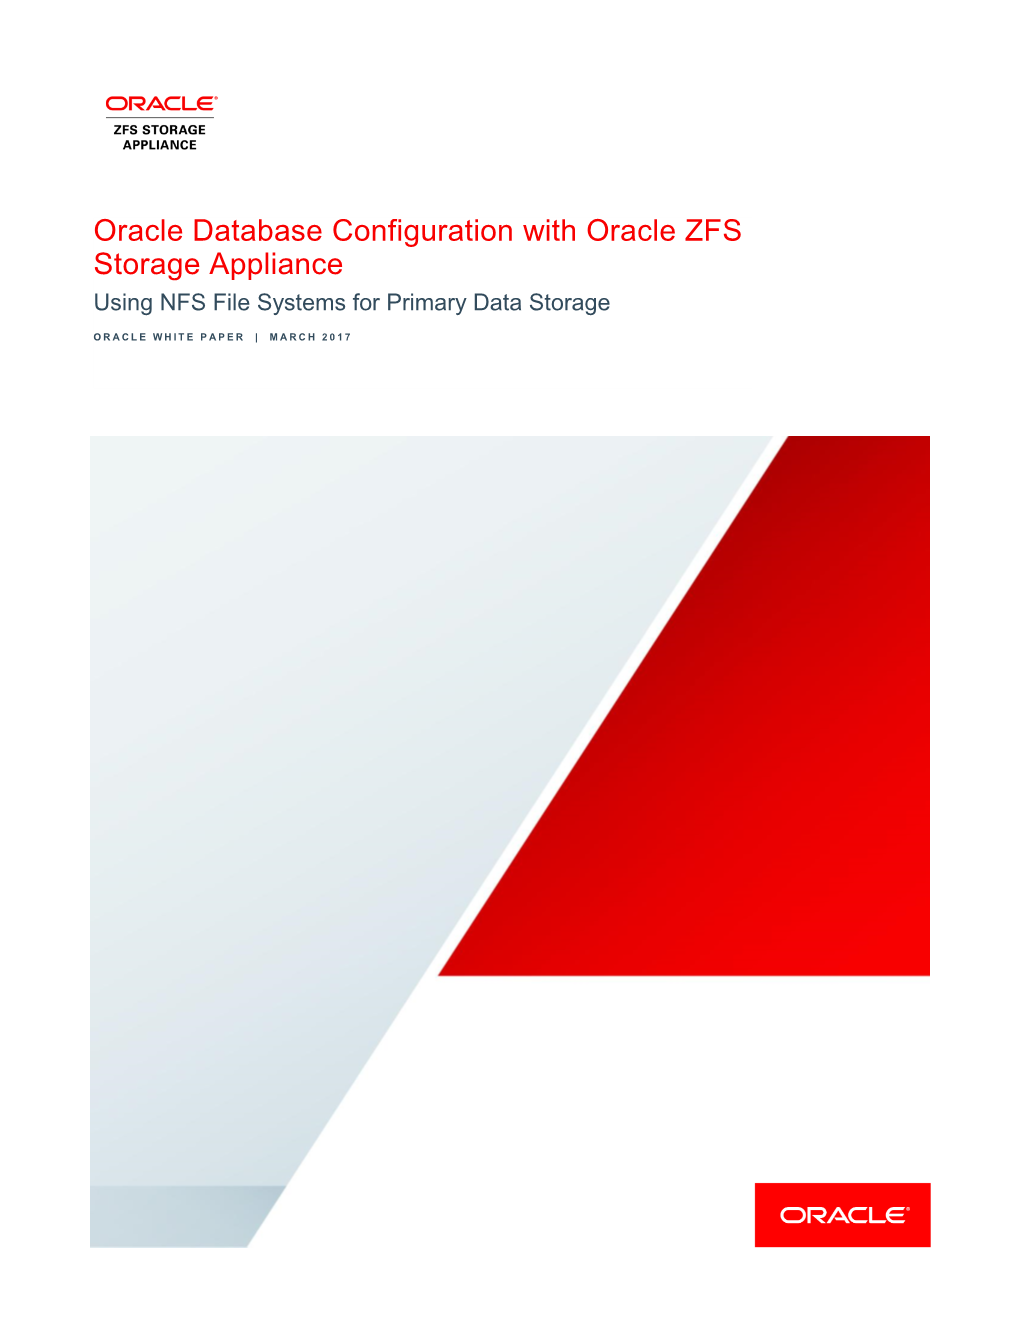 Oracle Database Configuration with Oracle ZFS Storage Appliance Using NFS File Systems for Primary Data Storage